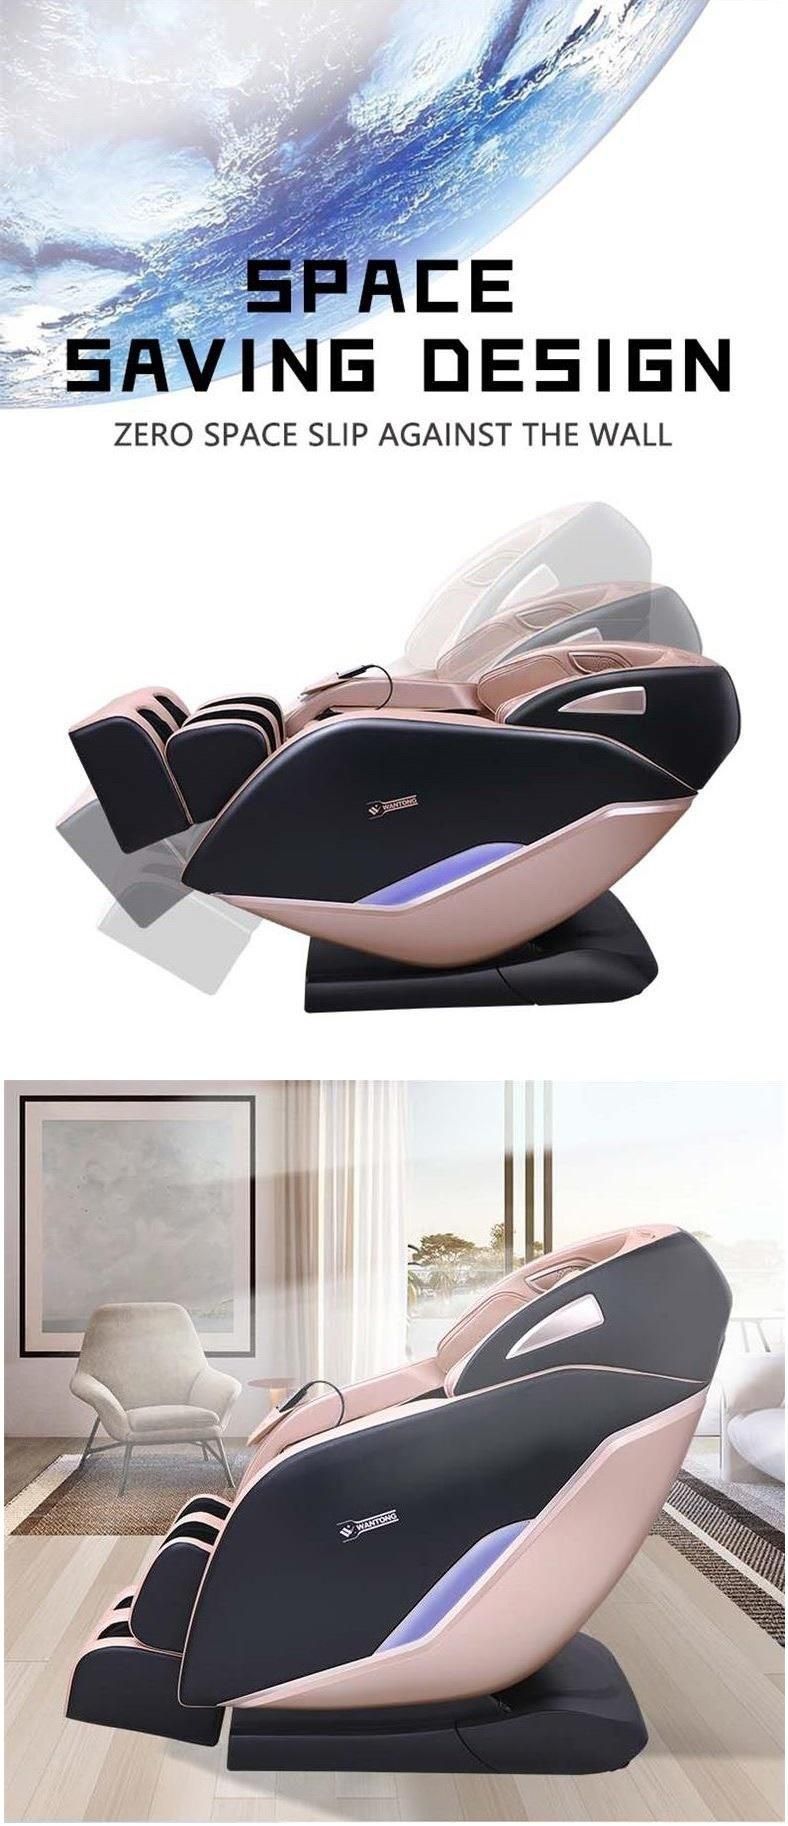 Electric Full Body SL Track 4D Zero Gravity Home and Office Music Massage Chair